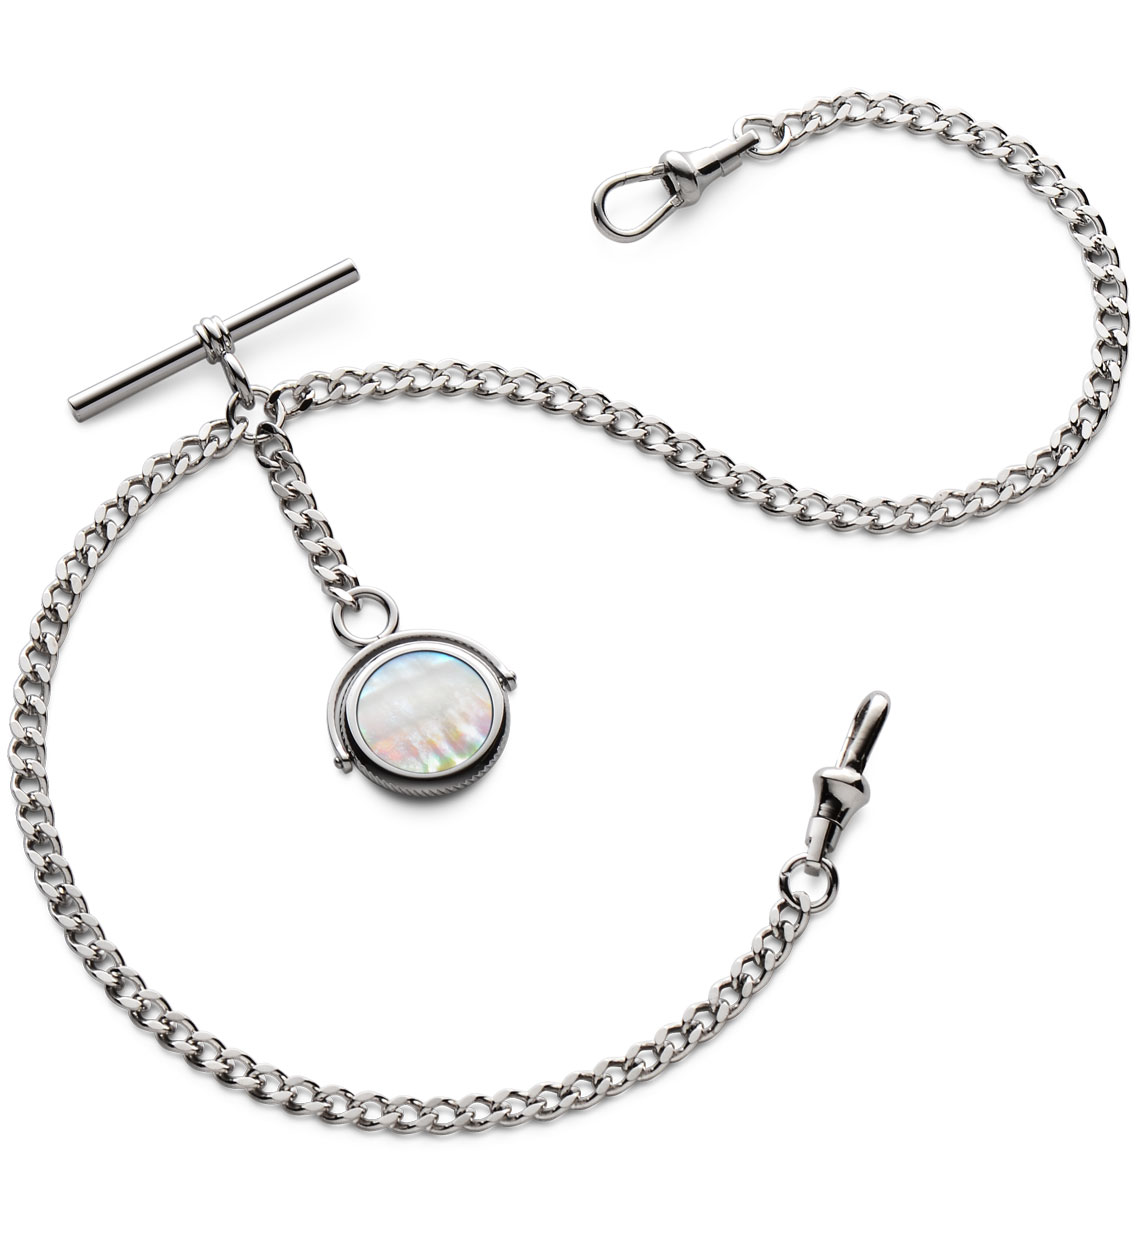 pocket watch and chain